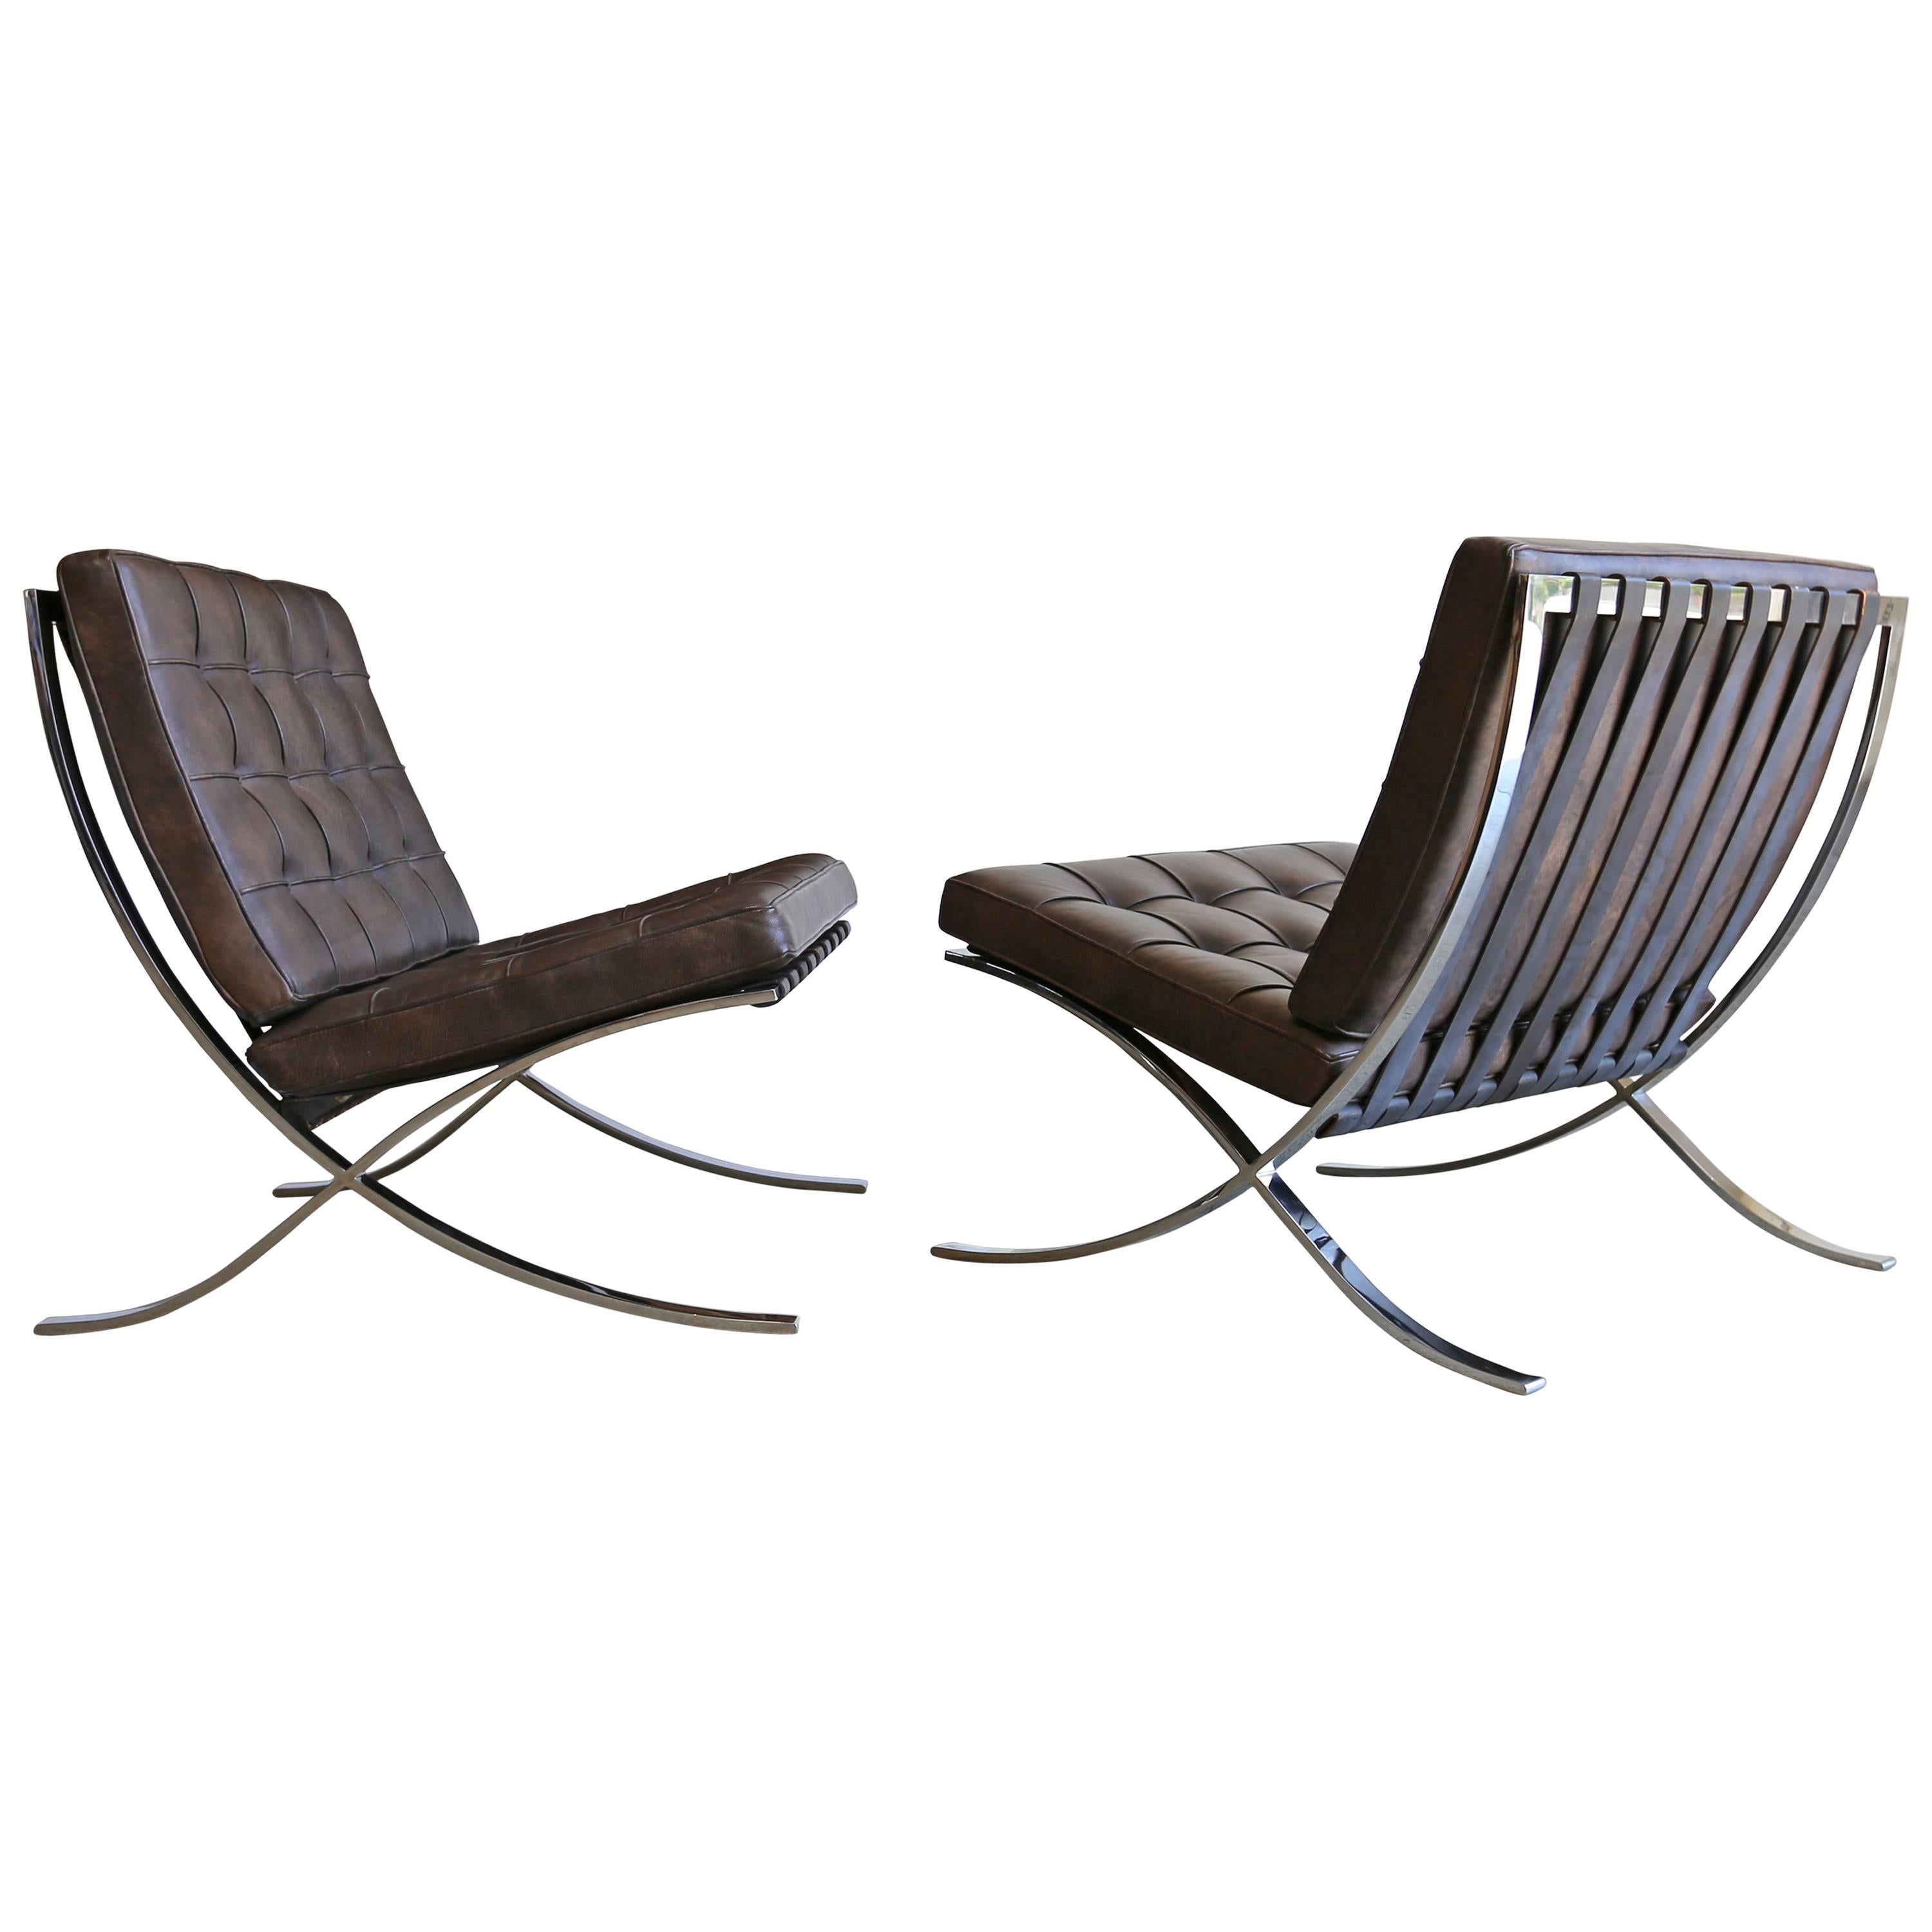 Rare Barcelona Chairs by Ludwig Mies van der Rohe for Gerald R. Griffith